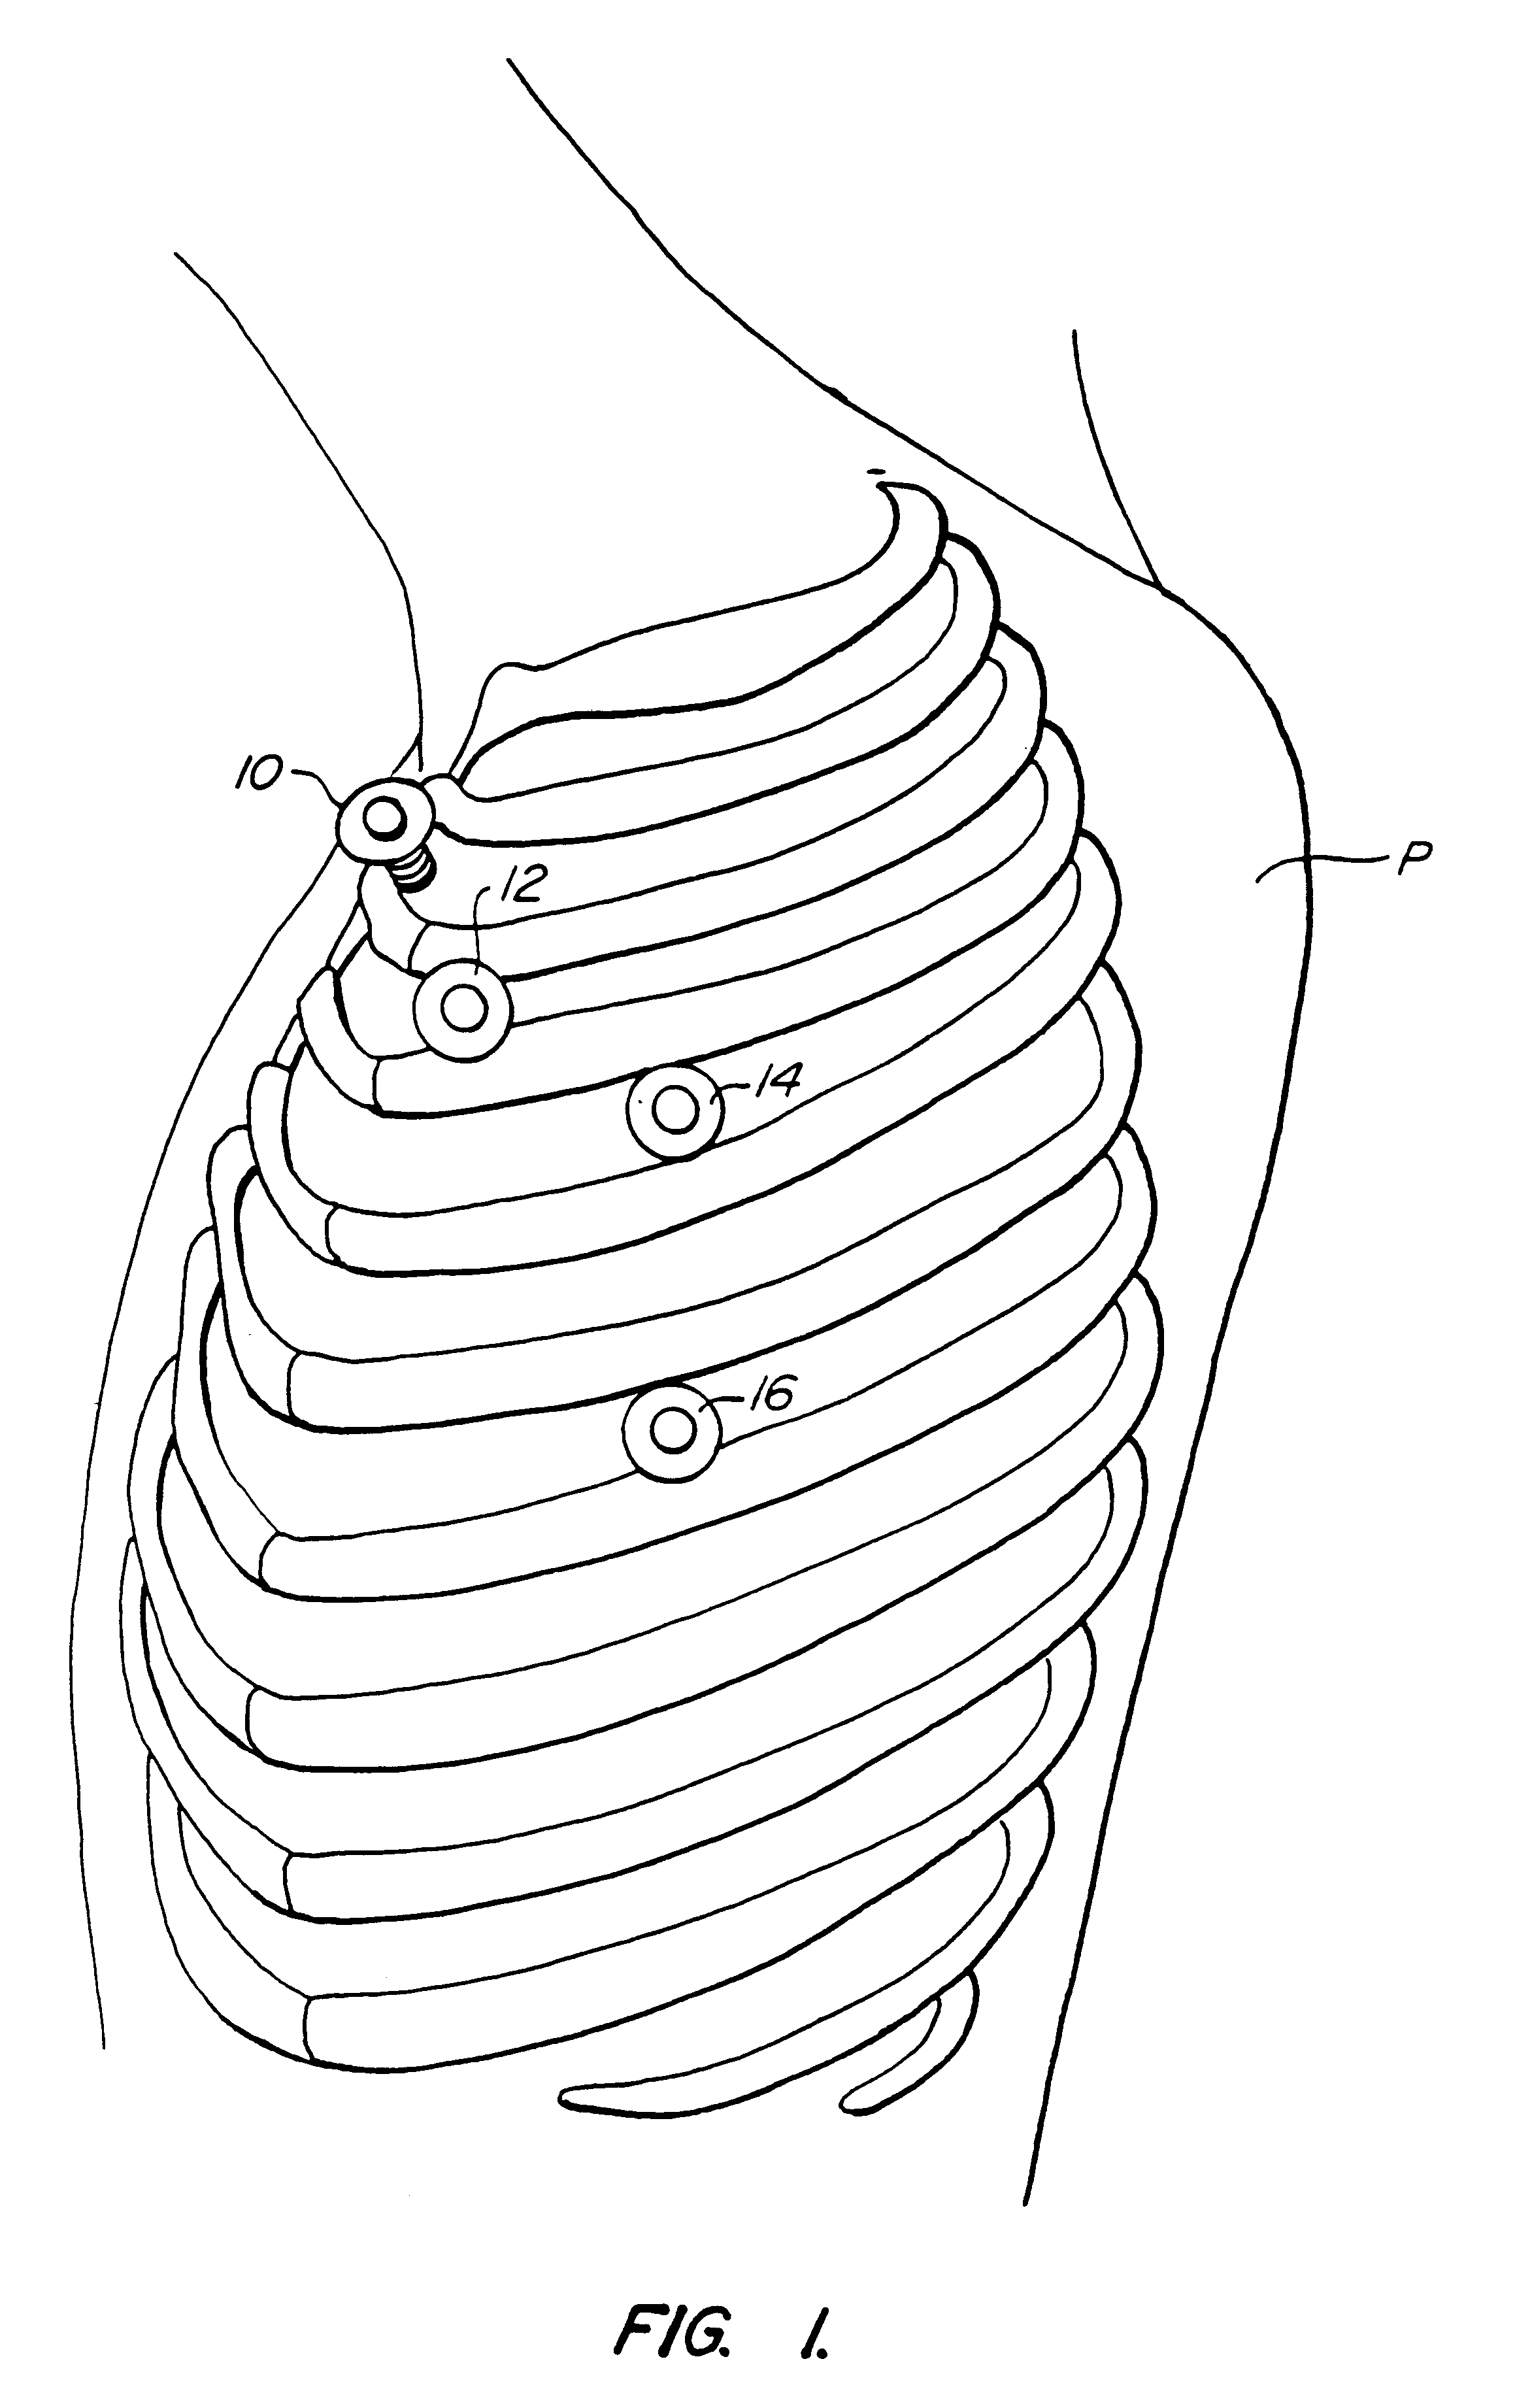 Method and systems for performing thoracoscopic cardiac bypass and other procedures